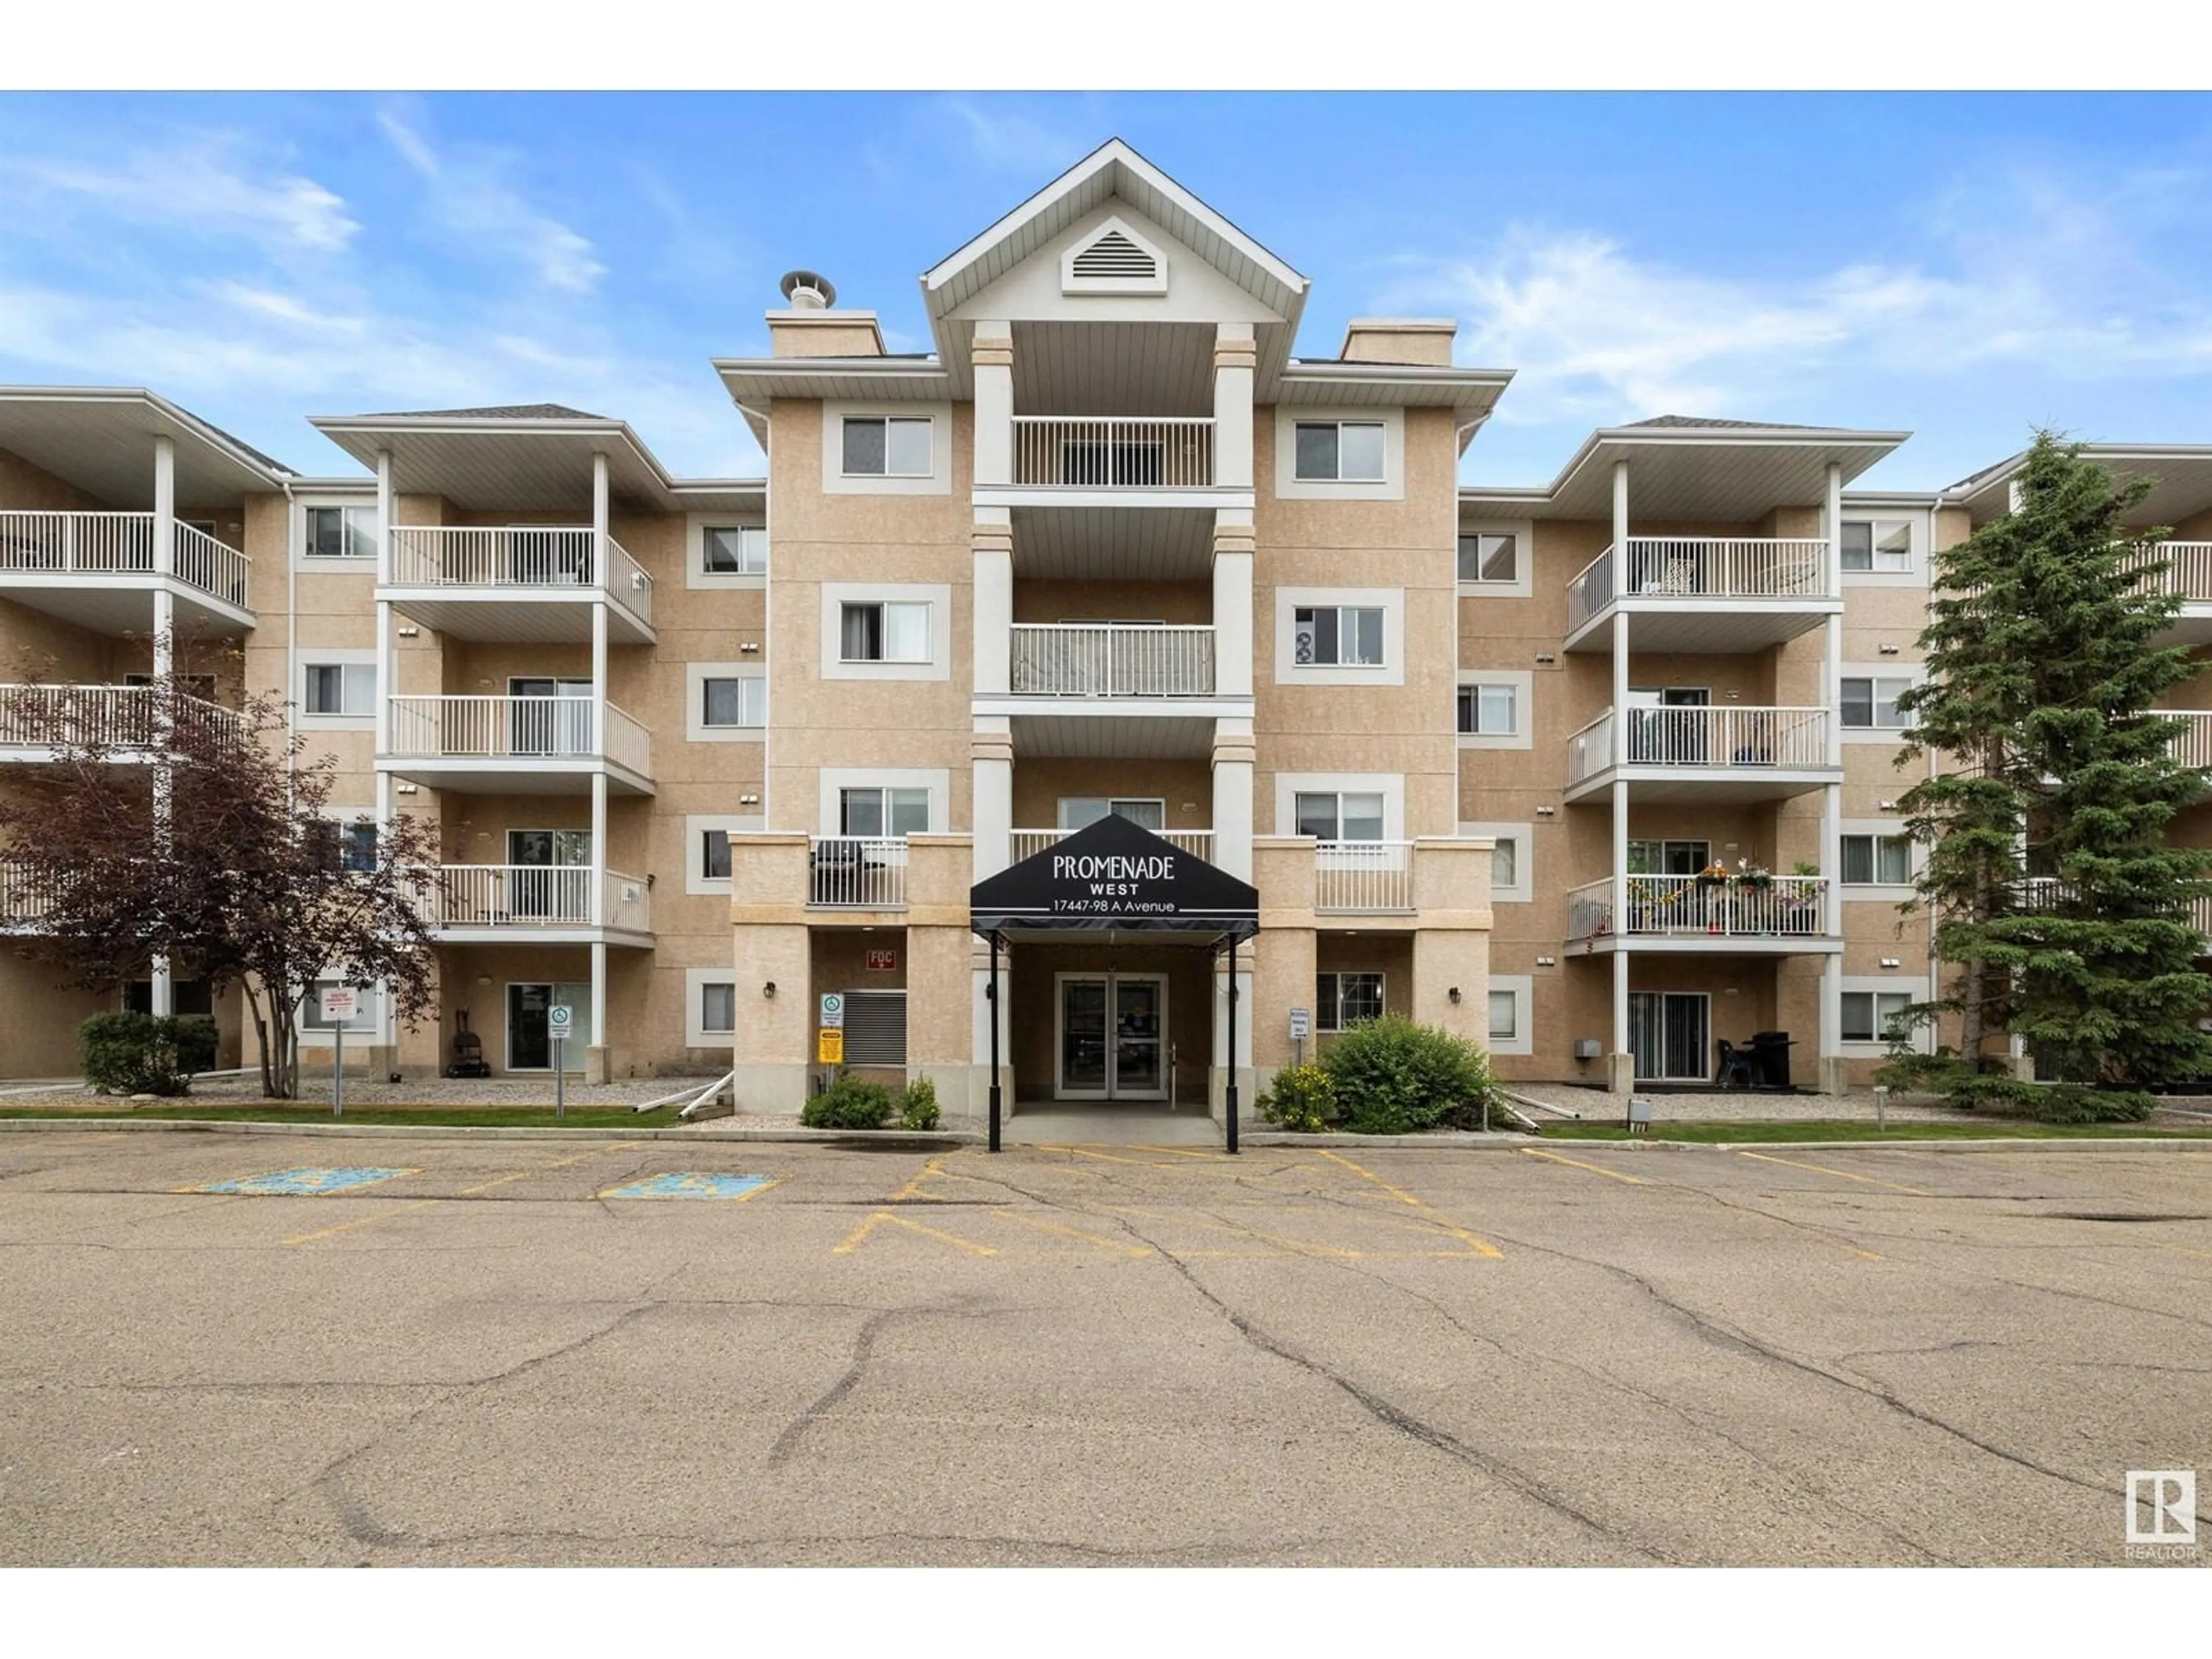 A pic from exterior of the house or condo for #337 17447 98A AV NW, Edmonton Alberta T5T6M4